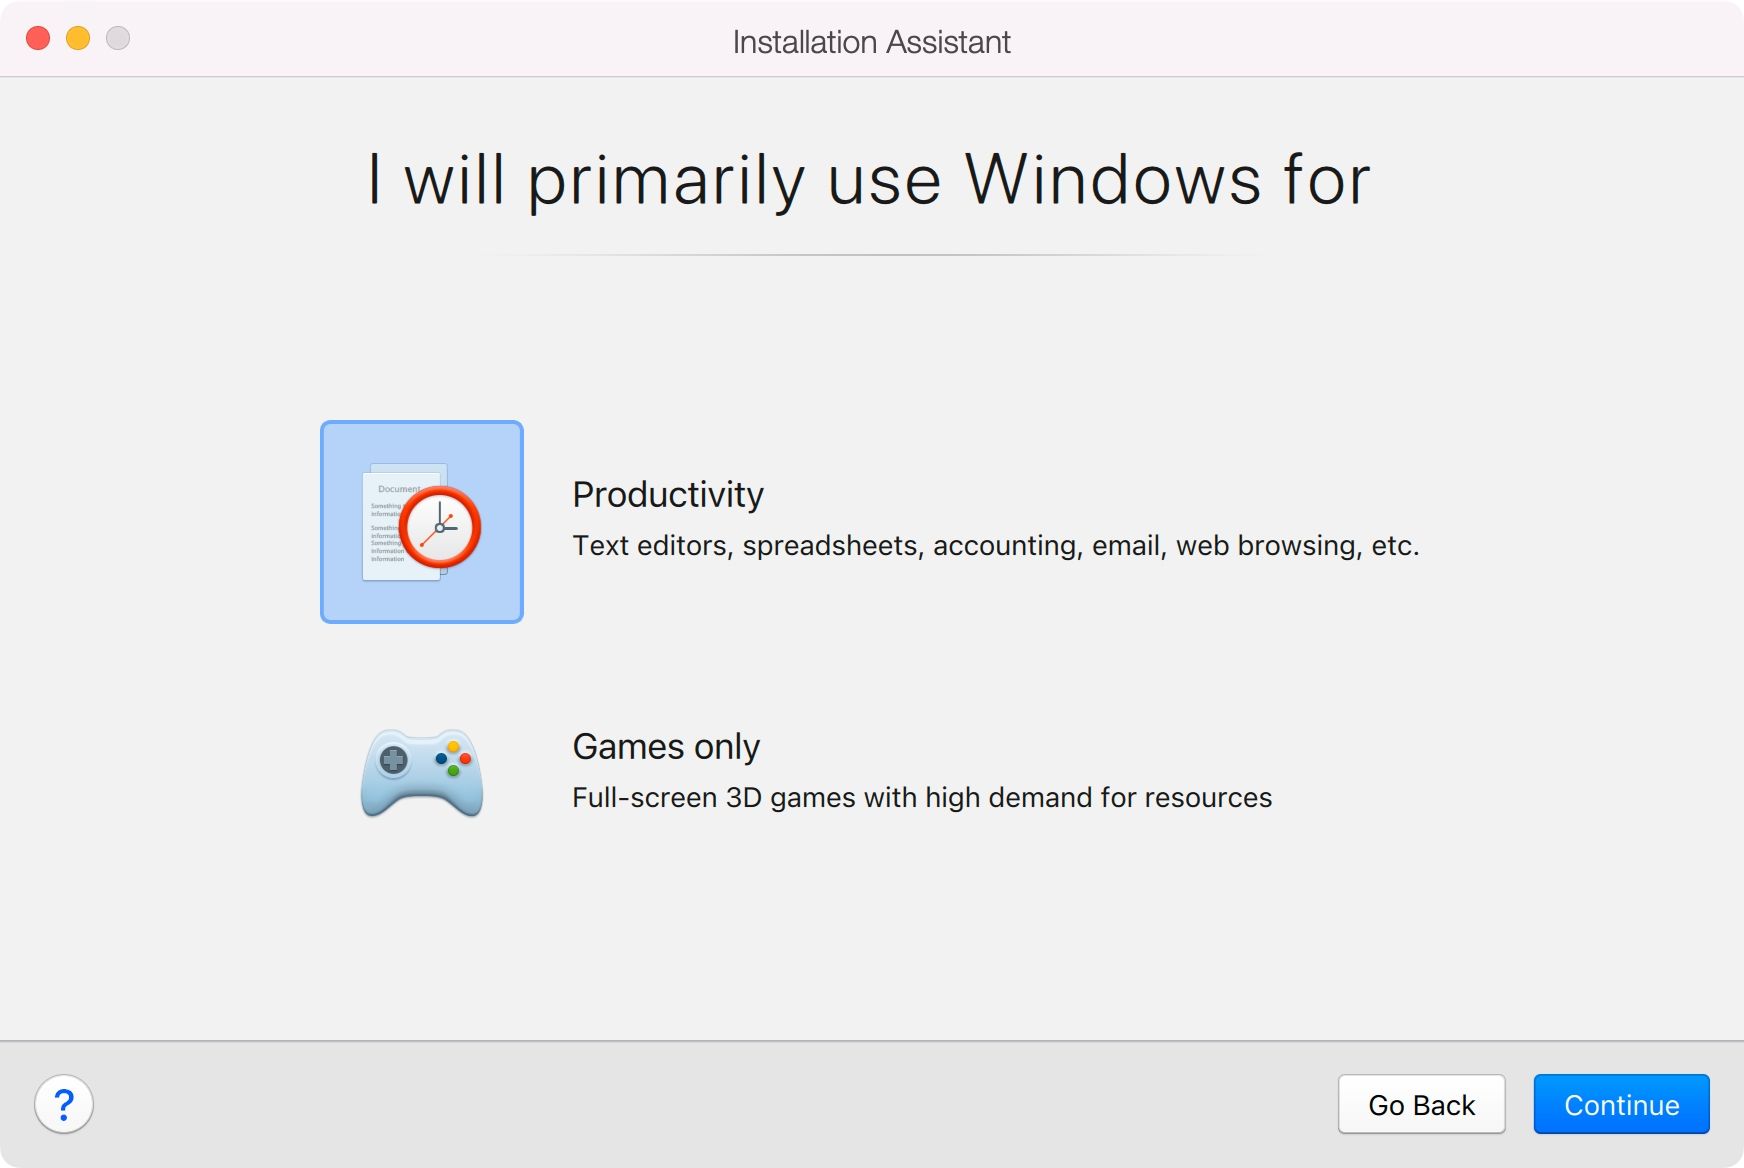 Parallels Desktop asking how the user will primarily use Windows